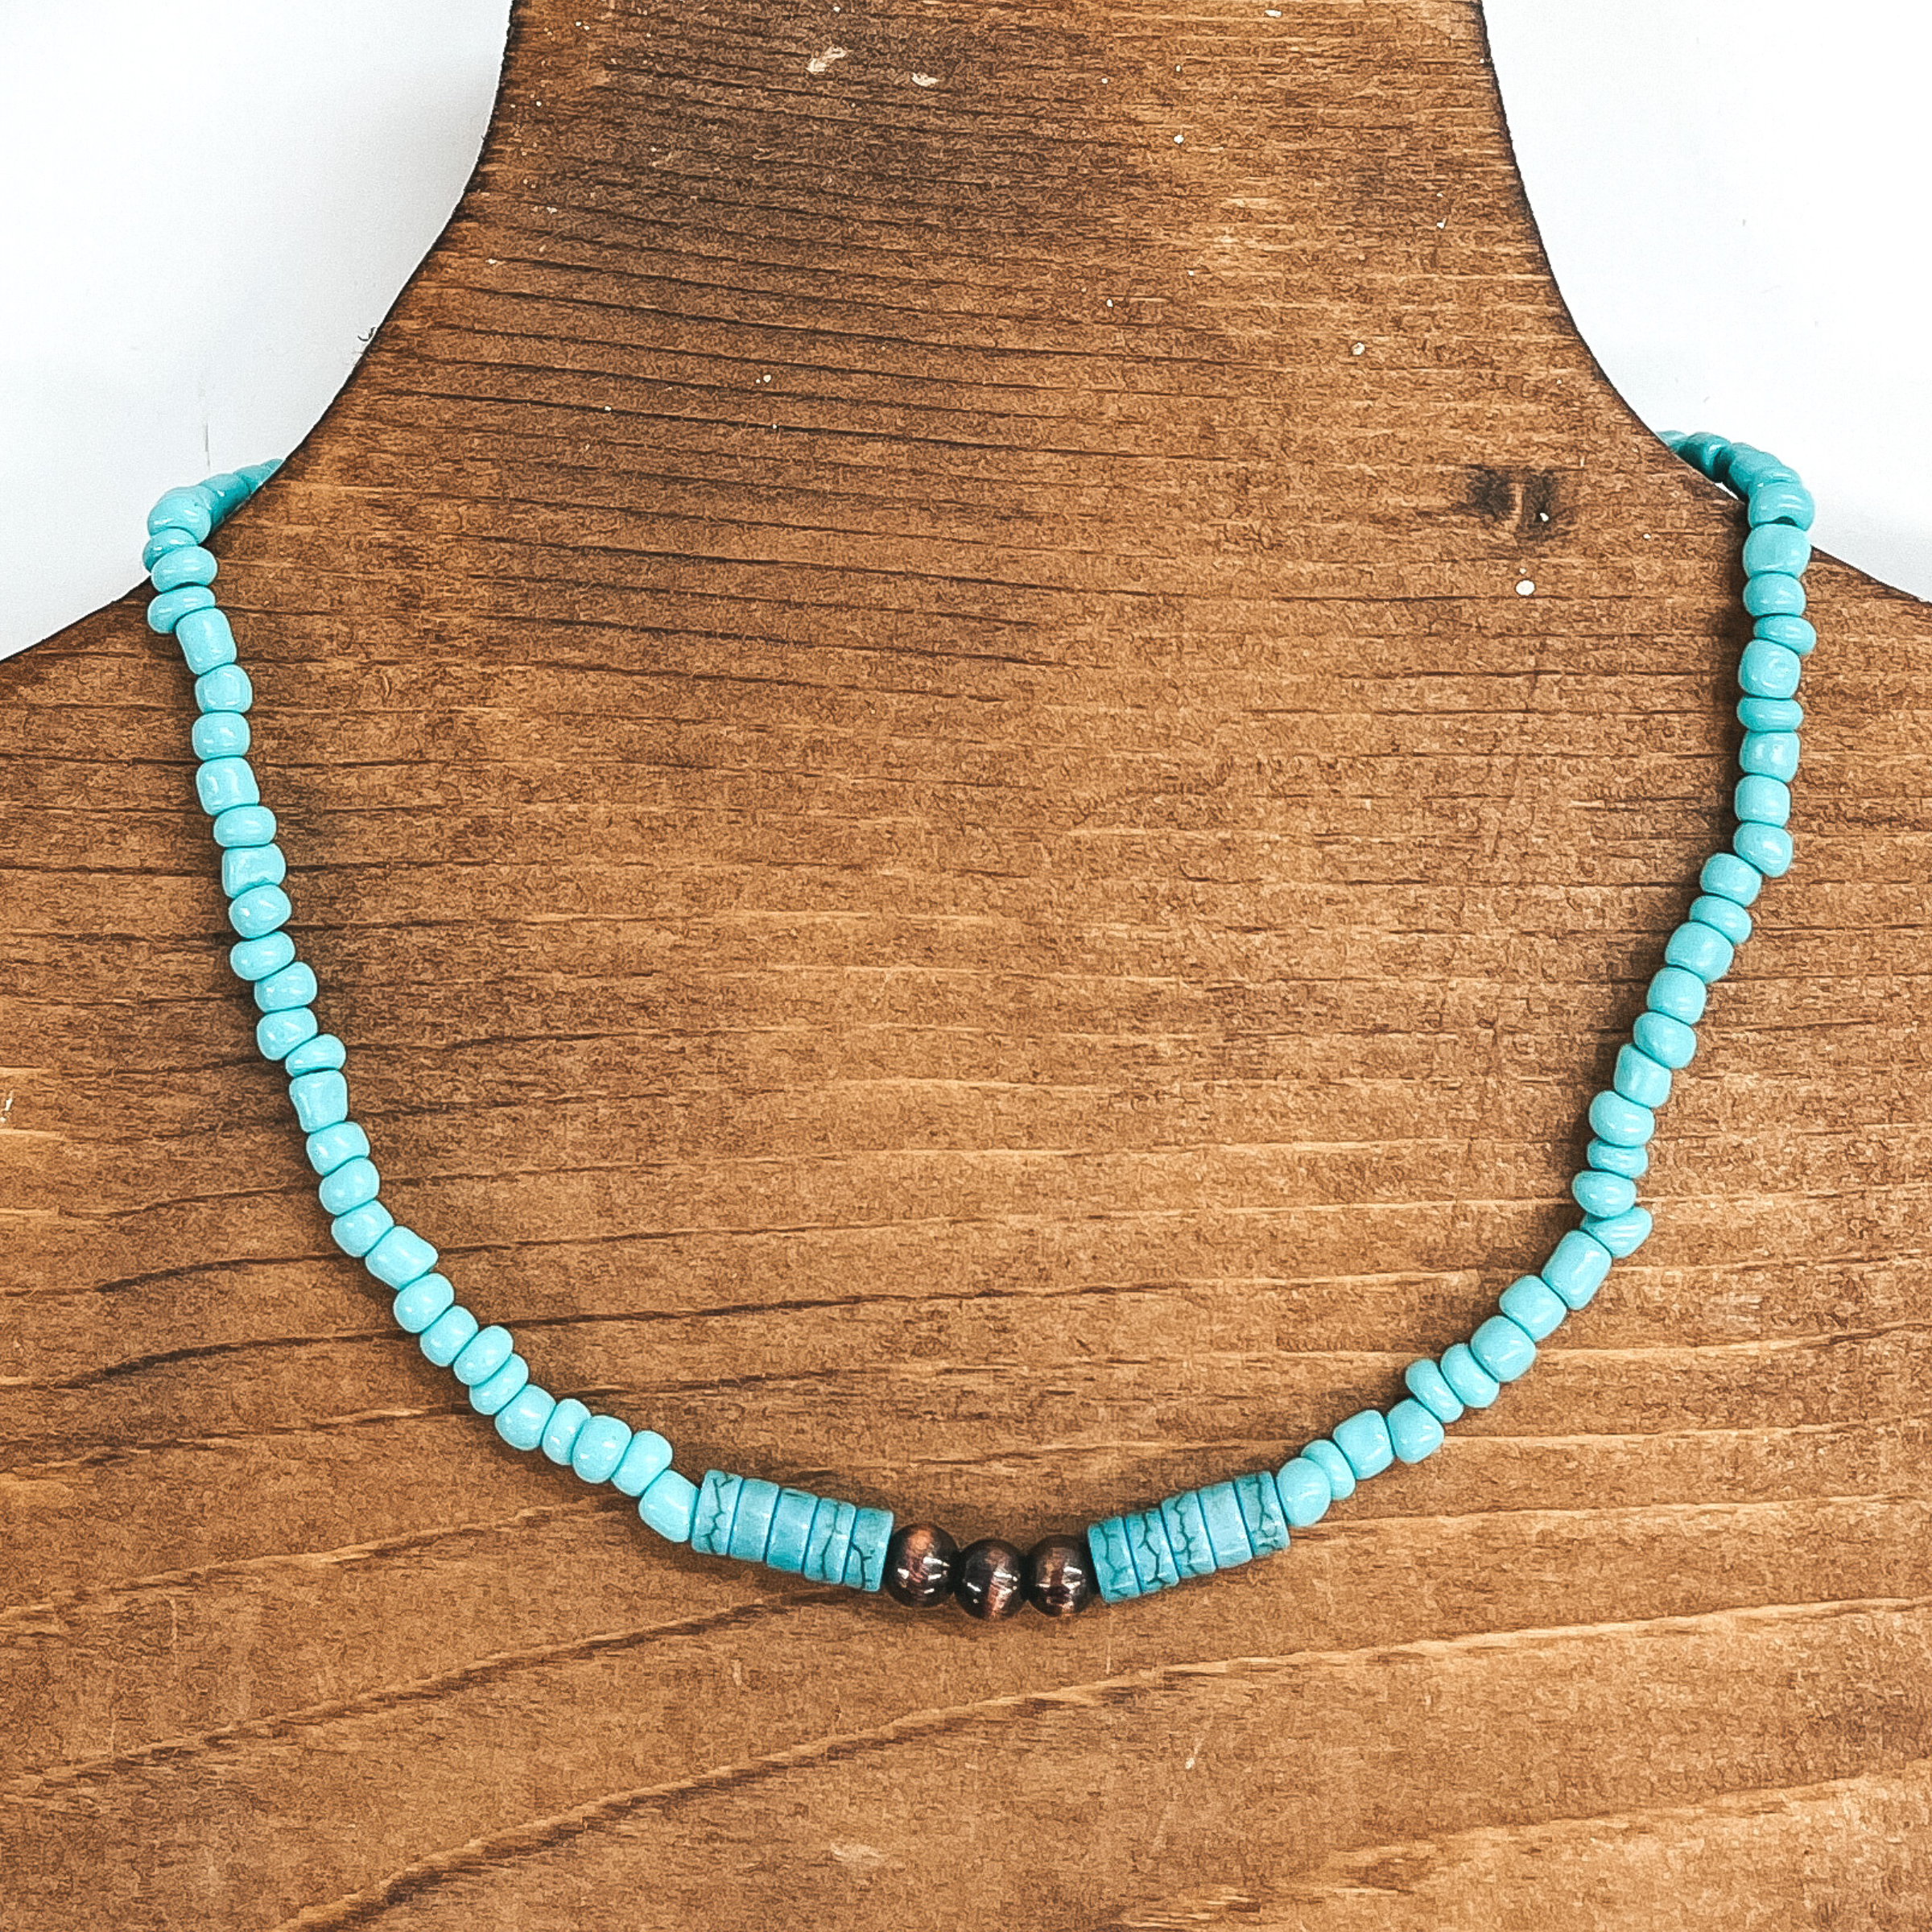 Feeling Free Turquoise and Teal Beaded Choker Necklace with Three Faux Navajo Beads in Copper Tone - Giddy Up Glamour Boutique